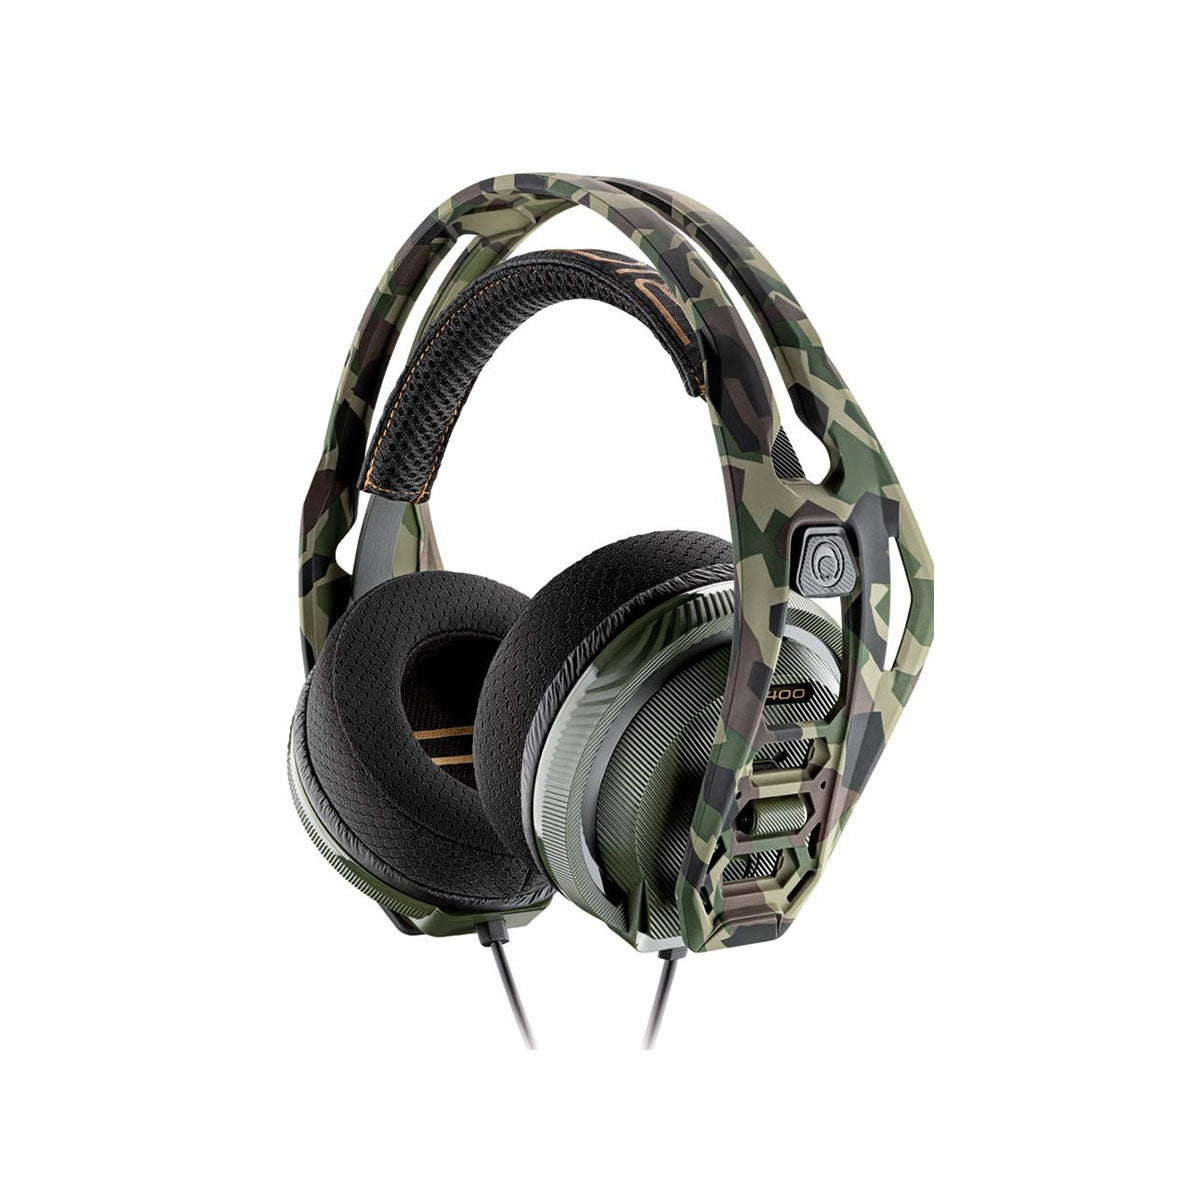 Rig 400 HA Forest Camo V2 Gaming Headset For PlayStation 4 and PlayStation 5.